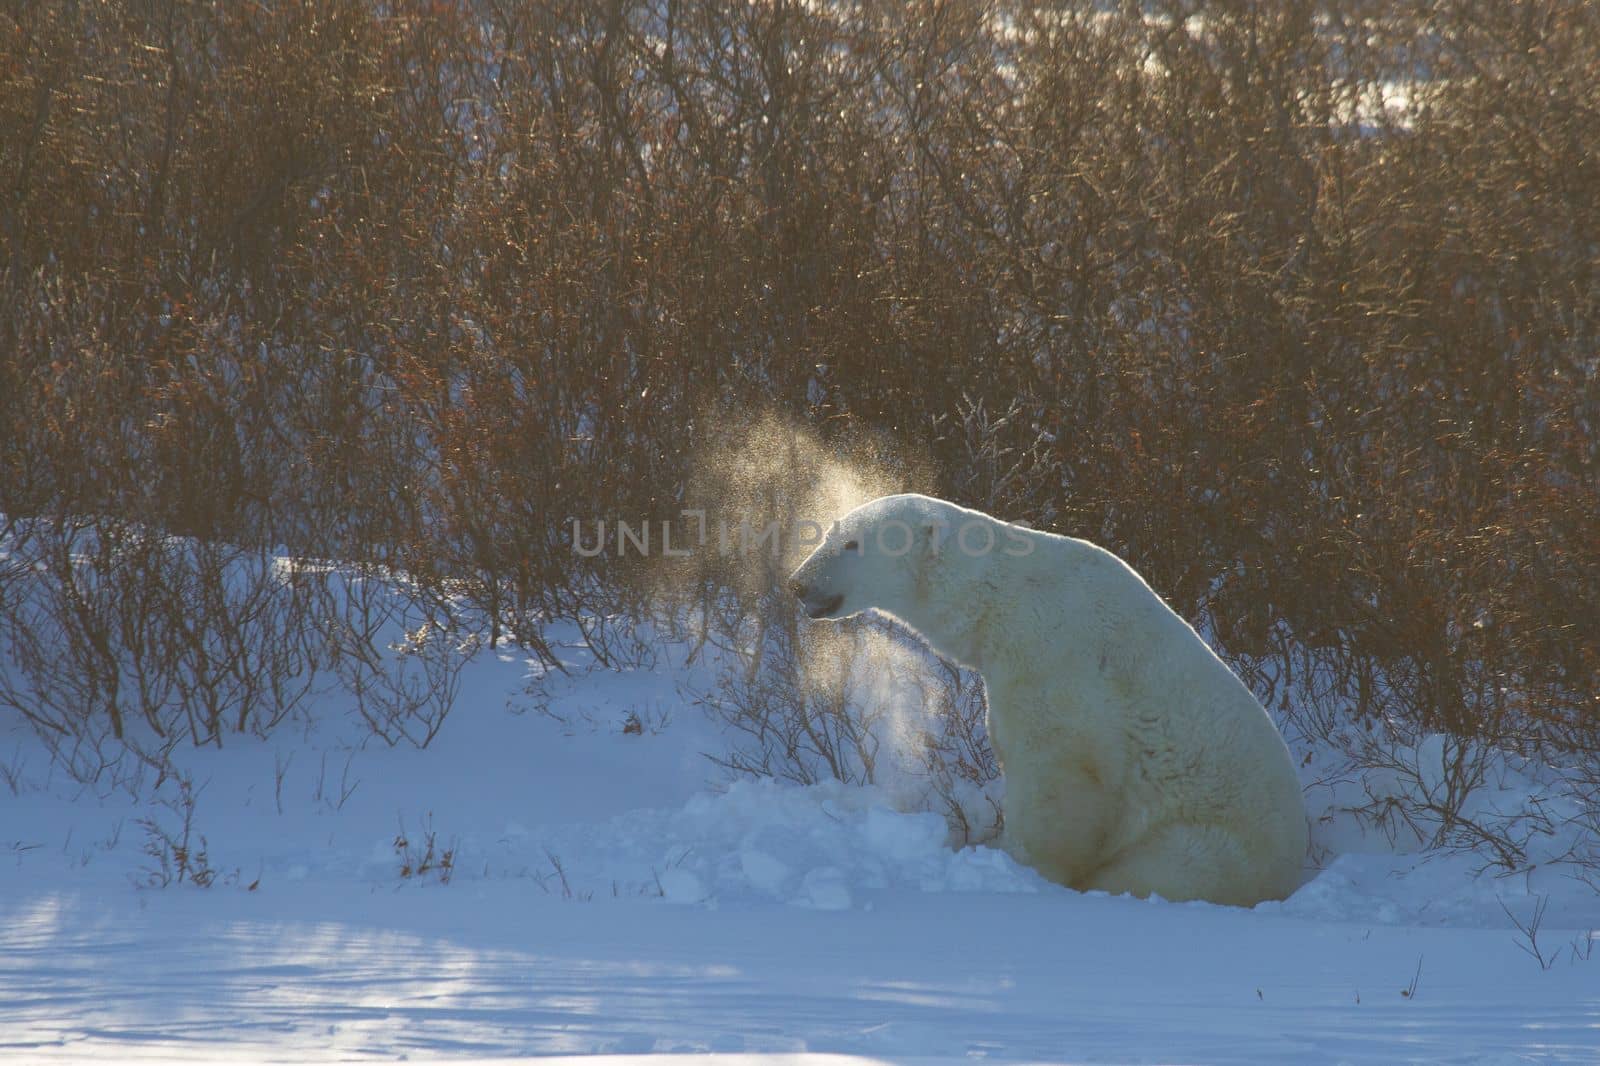 A polar bear or ursus maritumus shaking snow off, with willows in the background, near Churchill, Manitoba Canada